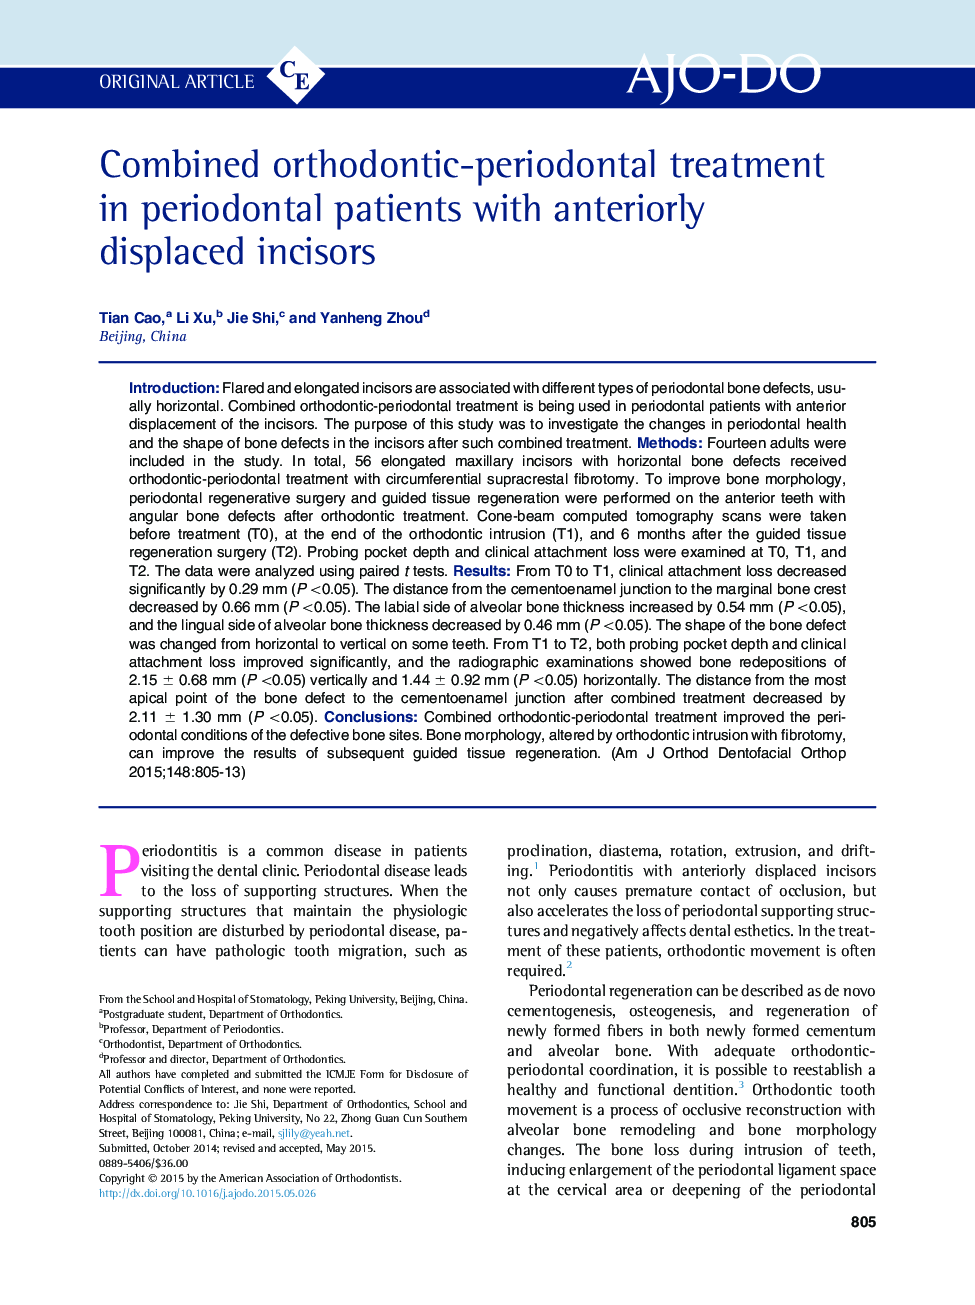 Combined orthodontic-periodontal treatment in periodontal patients with anteriorly displaced incisors 